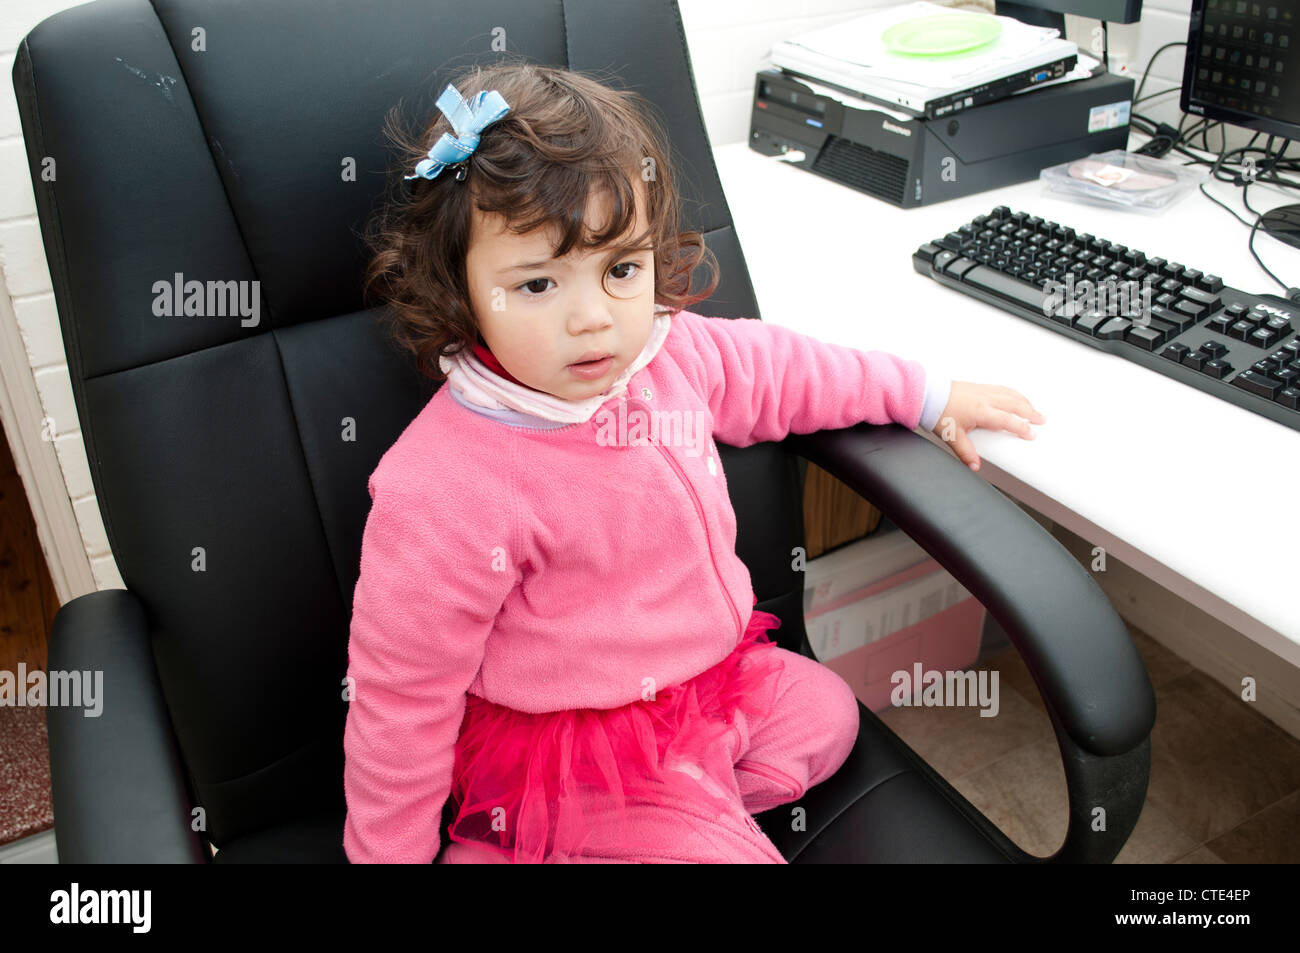 Little girl next to a computer Stock Photo